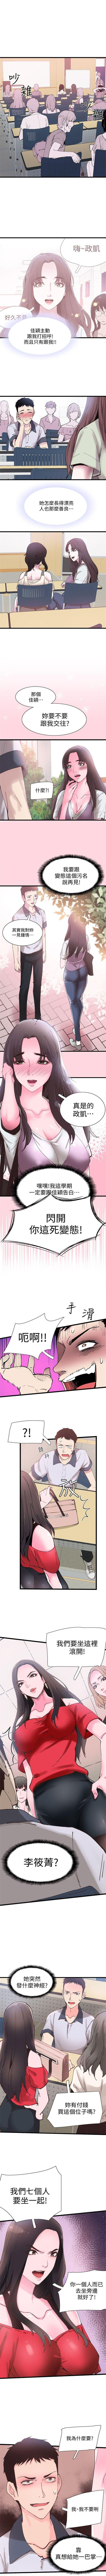 Hot Teen （週7）校園live秀 1-45 中文翻譯（更新中） Point Of View - Page 7